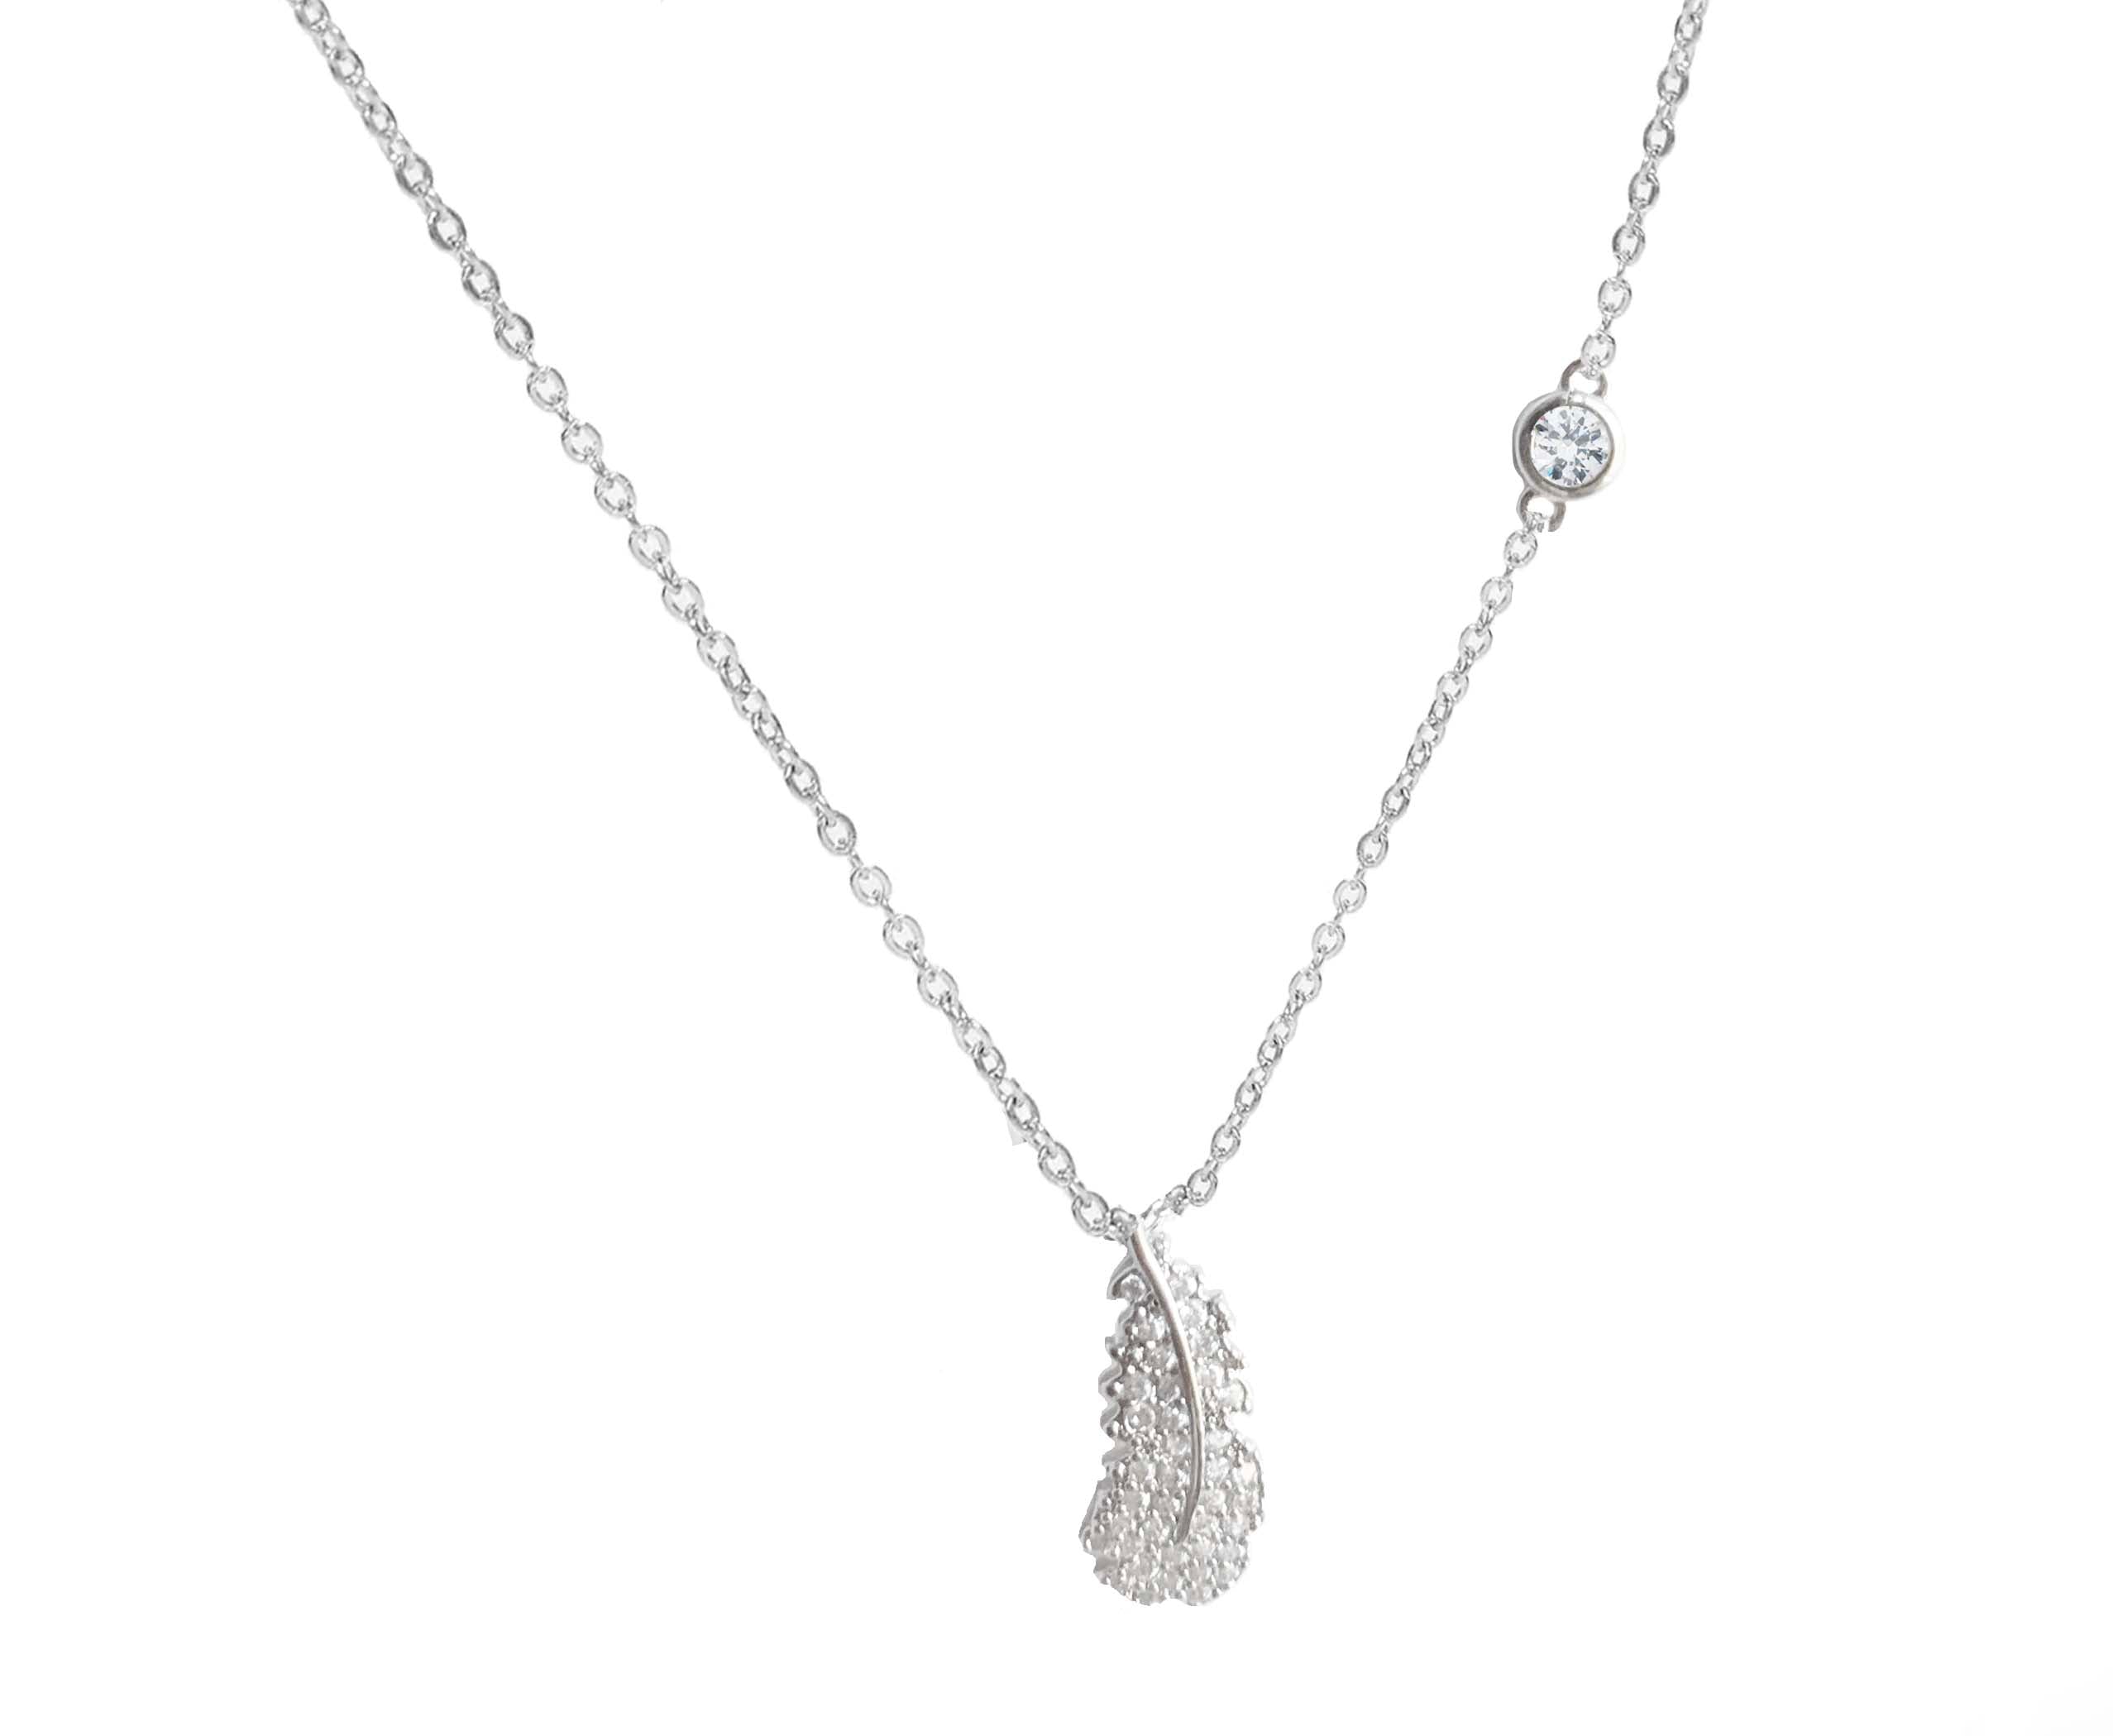 Feather Lucky Necklace CZ Crystal Pendant Necklace Silver Chain with Gift Pouch